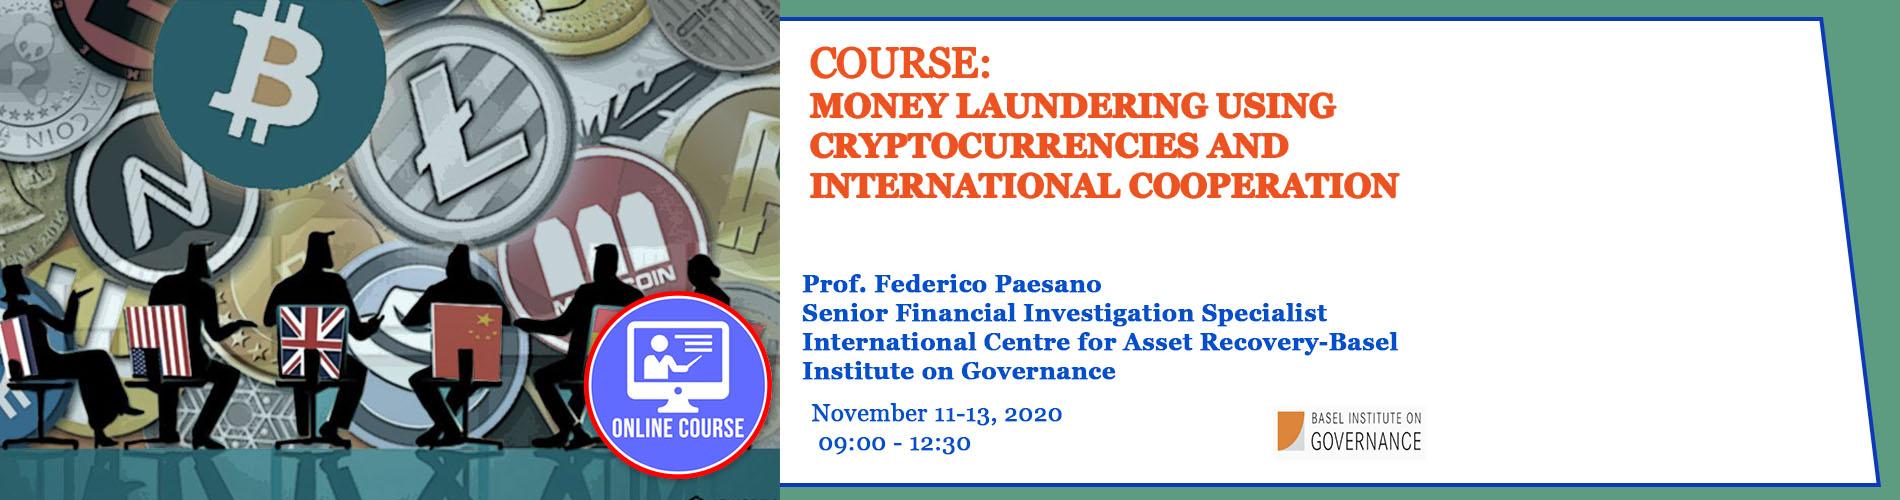 11.11.2020-Money Laundering Using Cryptocurrencies and International Cooperation